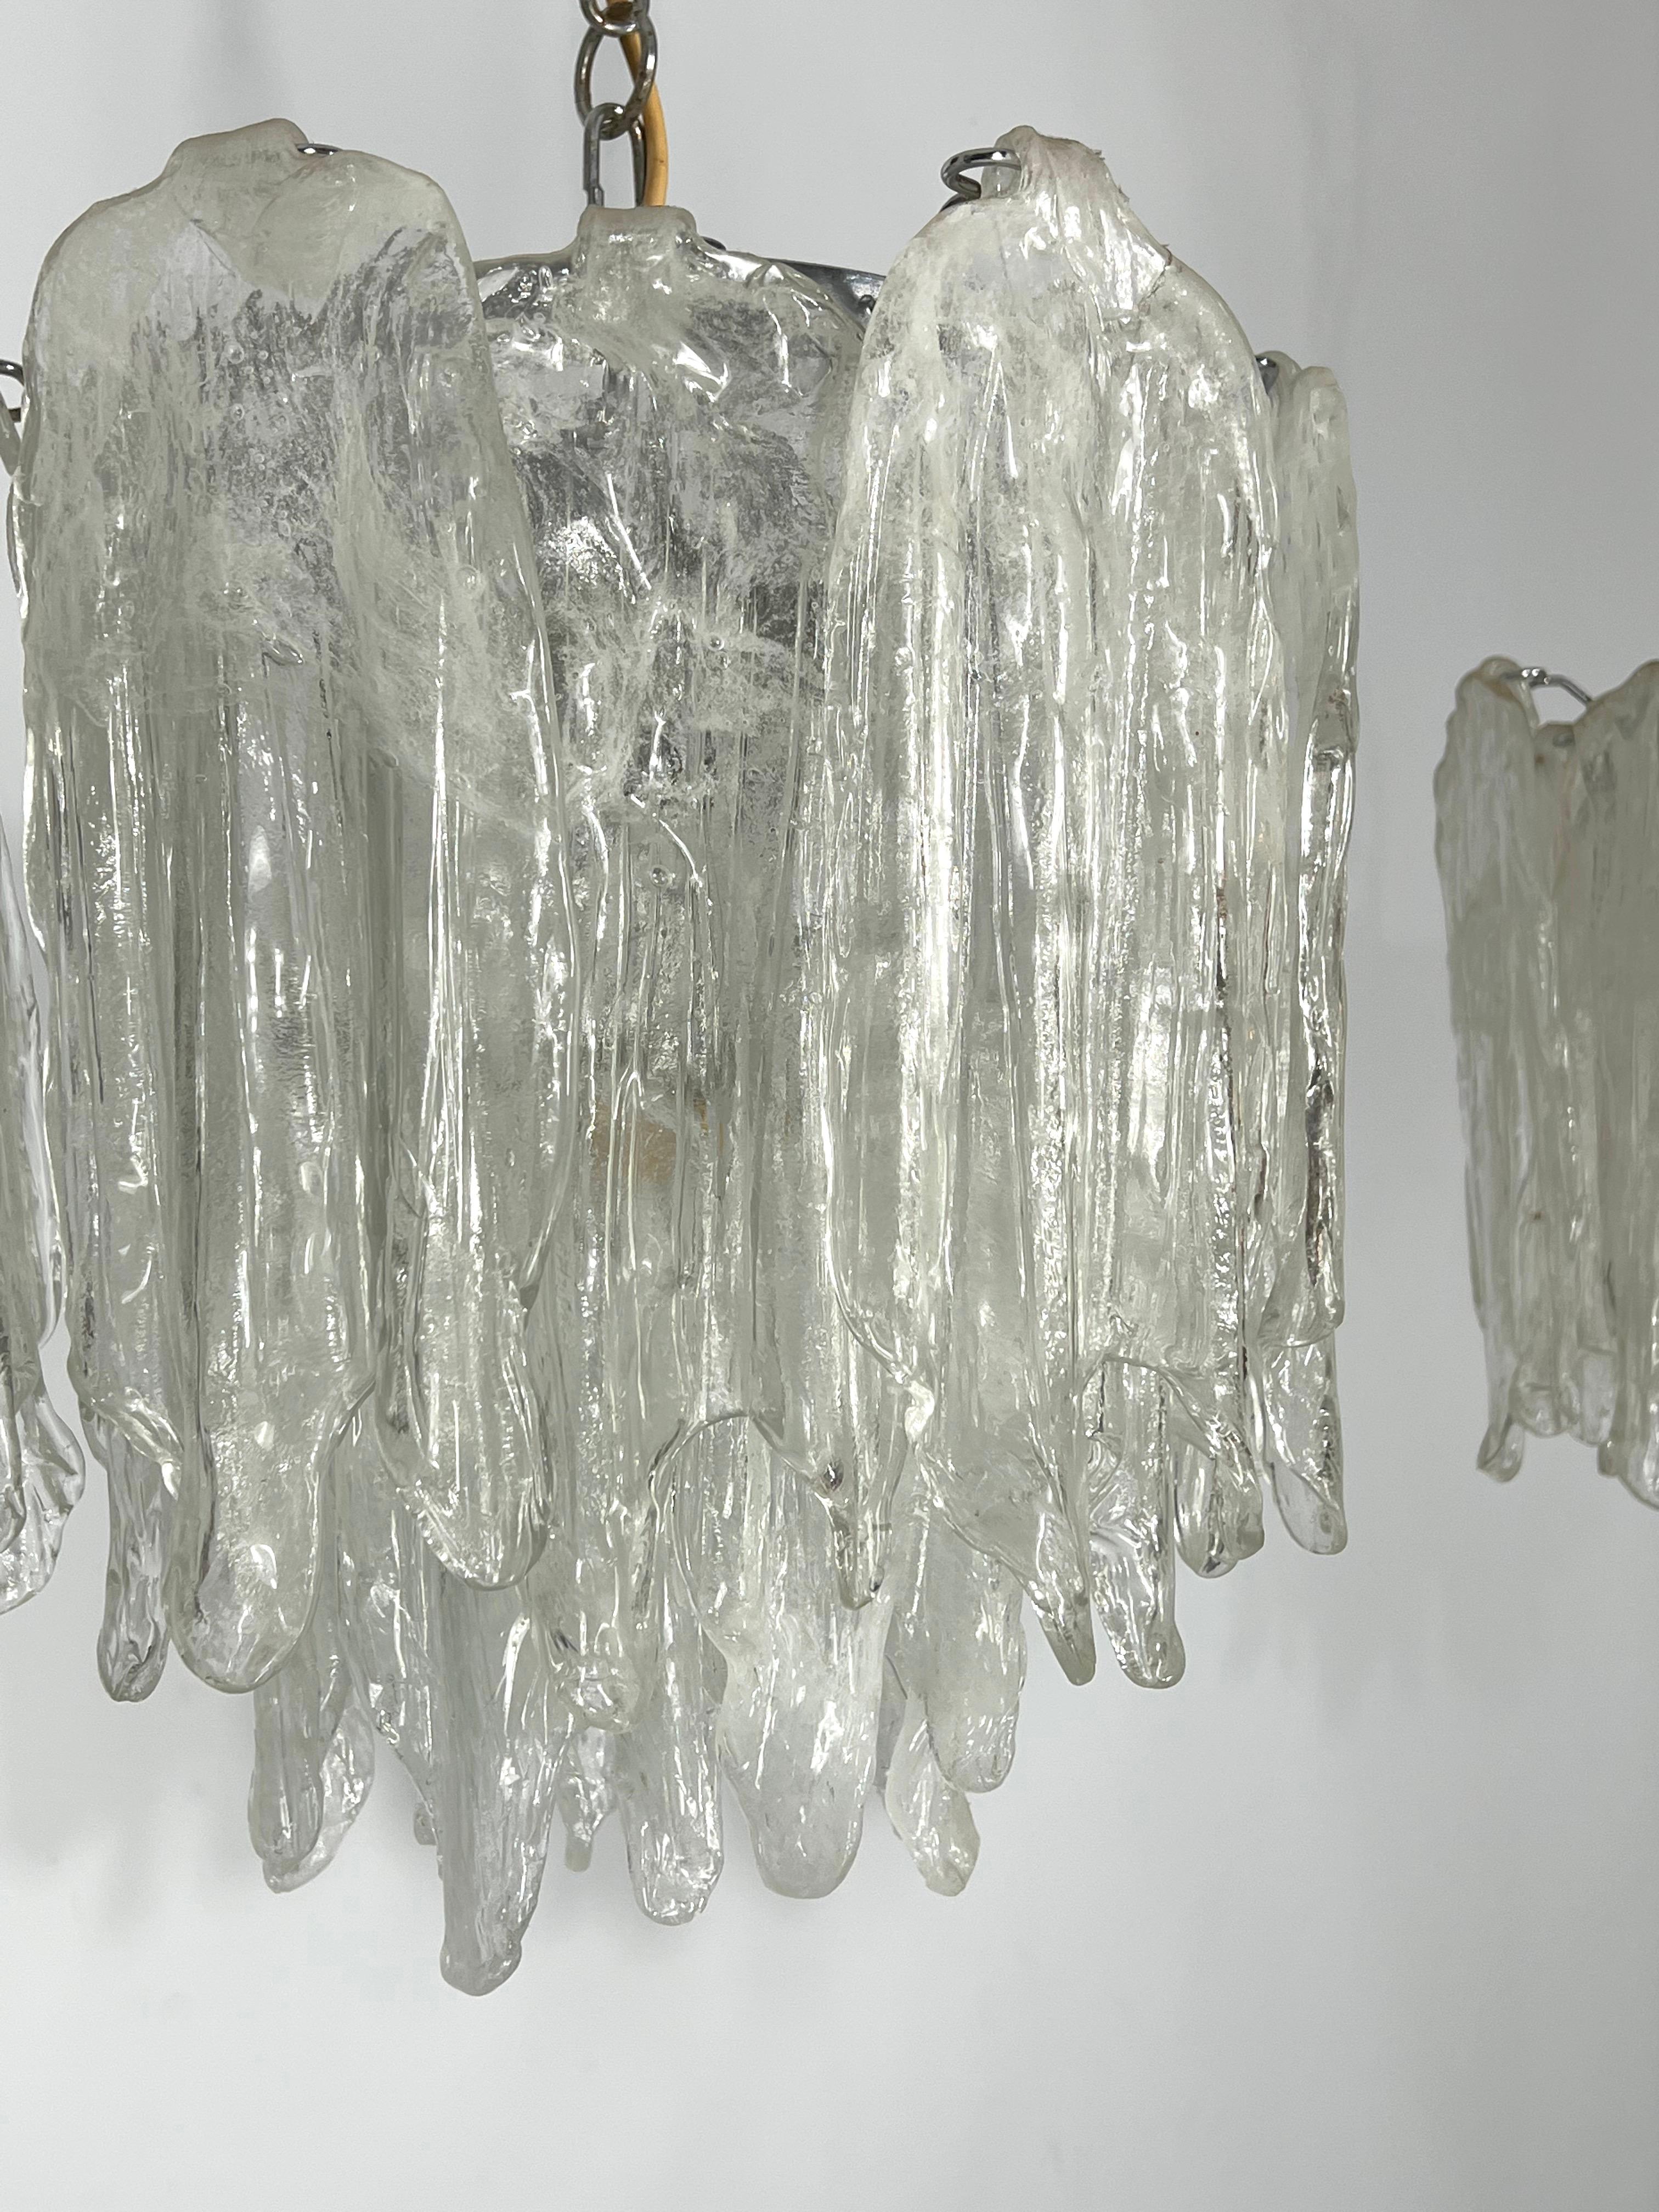 Mazzega Ice glass, pair of vintage murano chandeliers from 70s For Sale 10